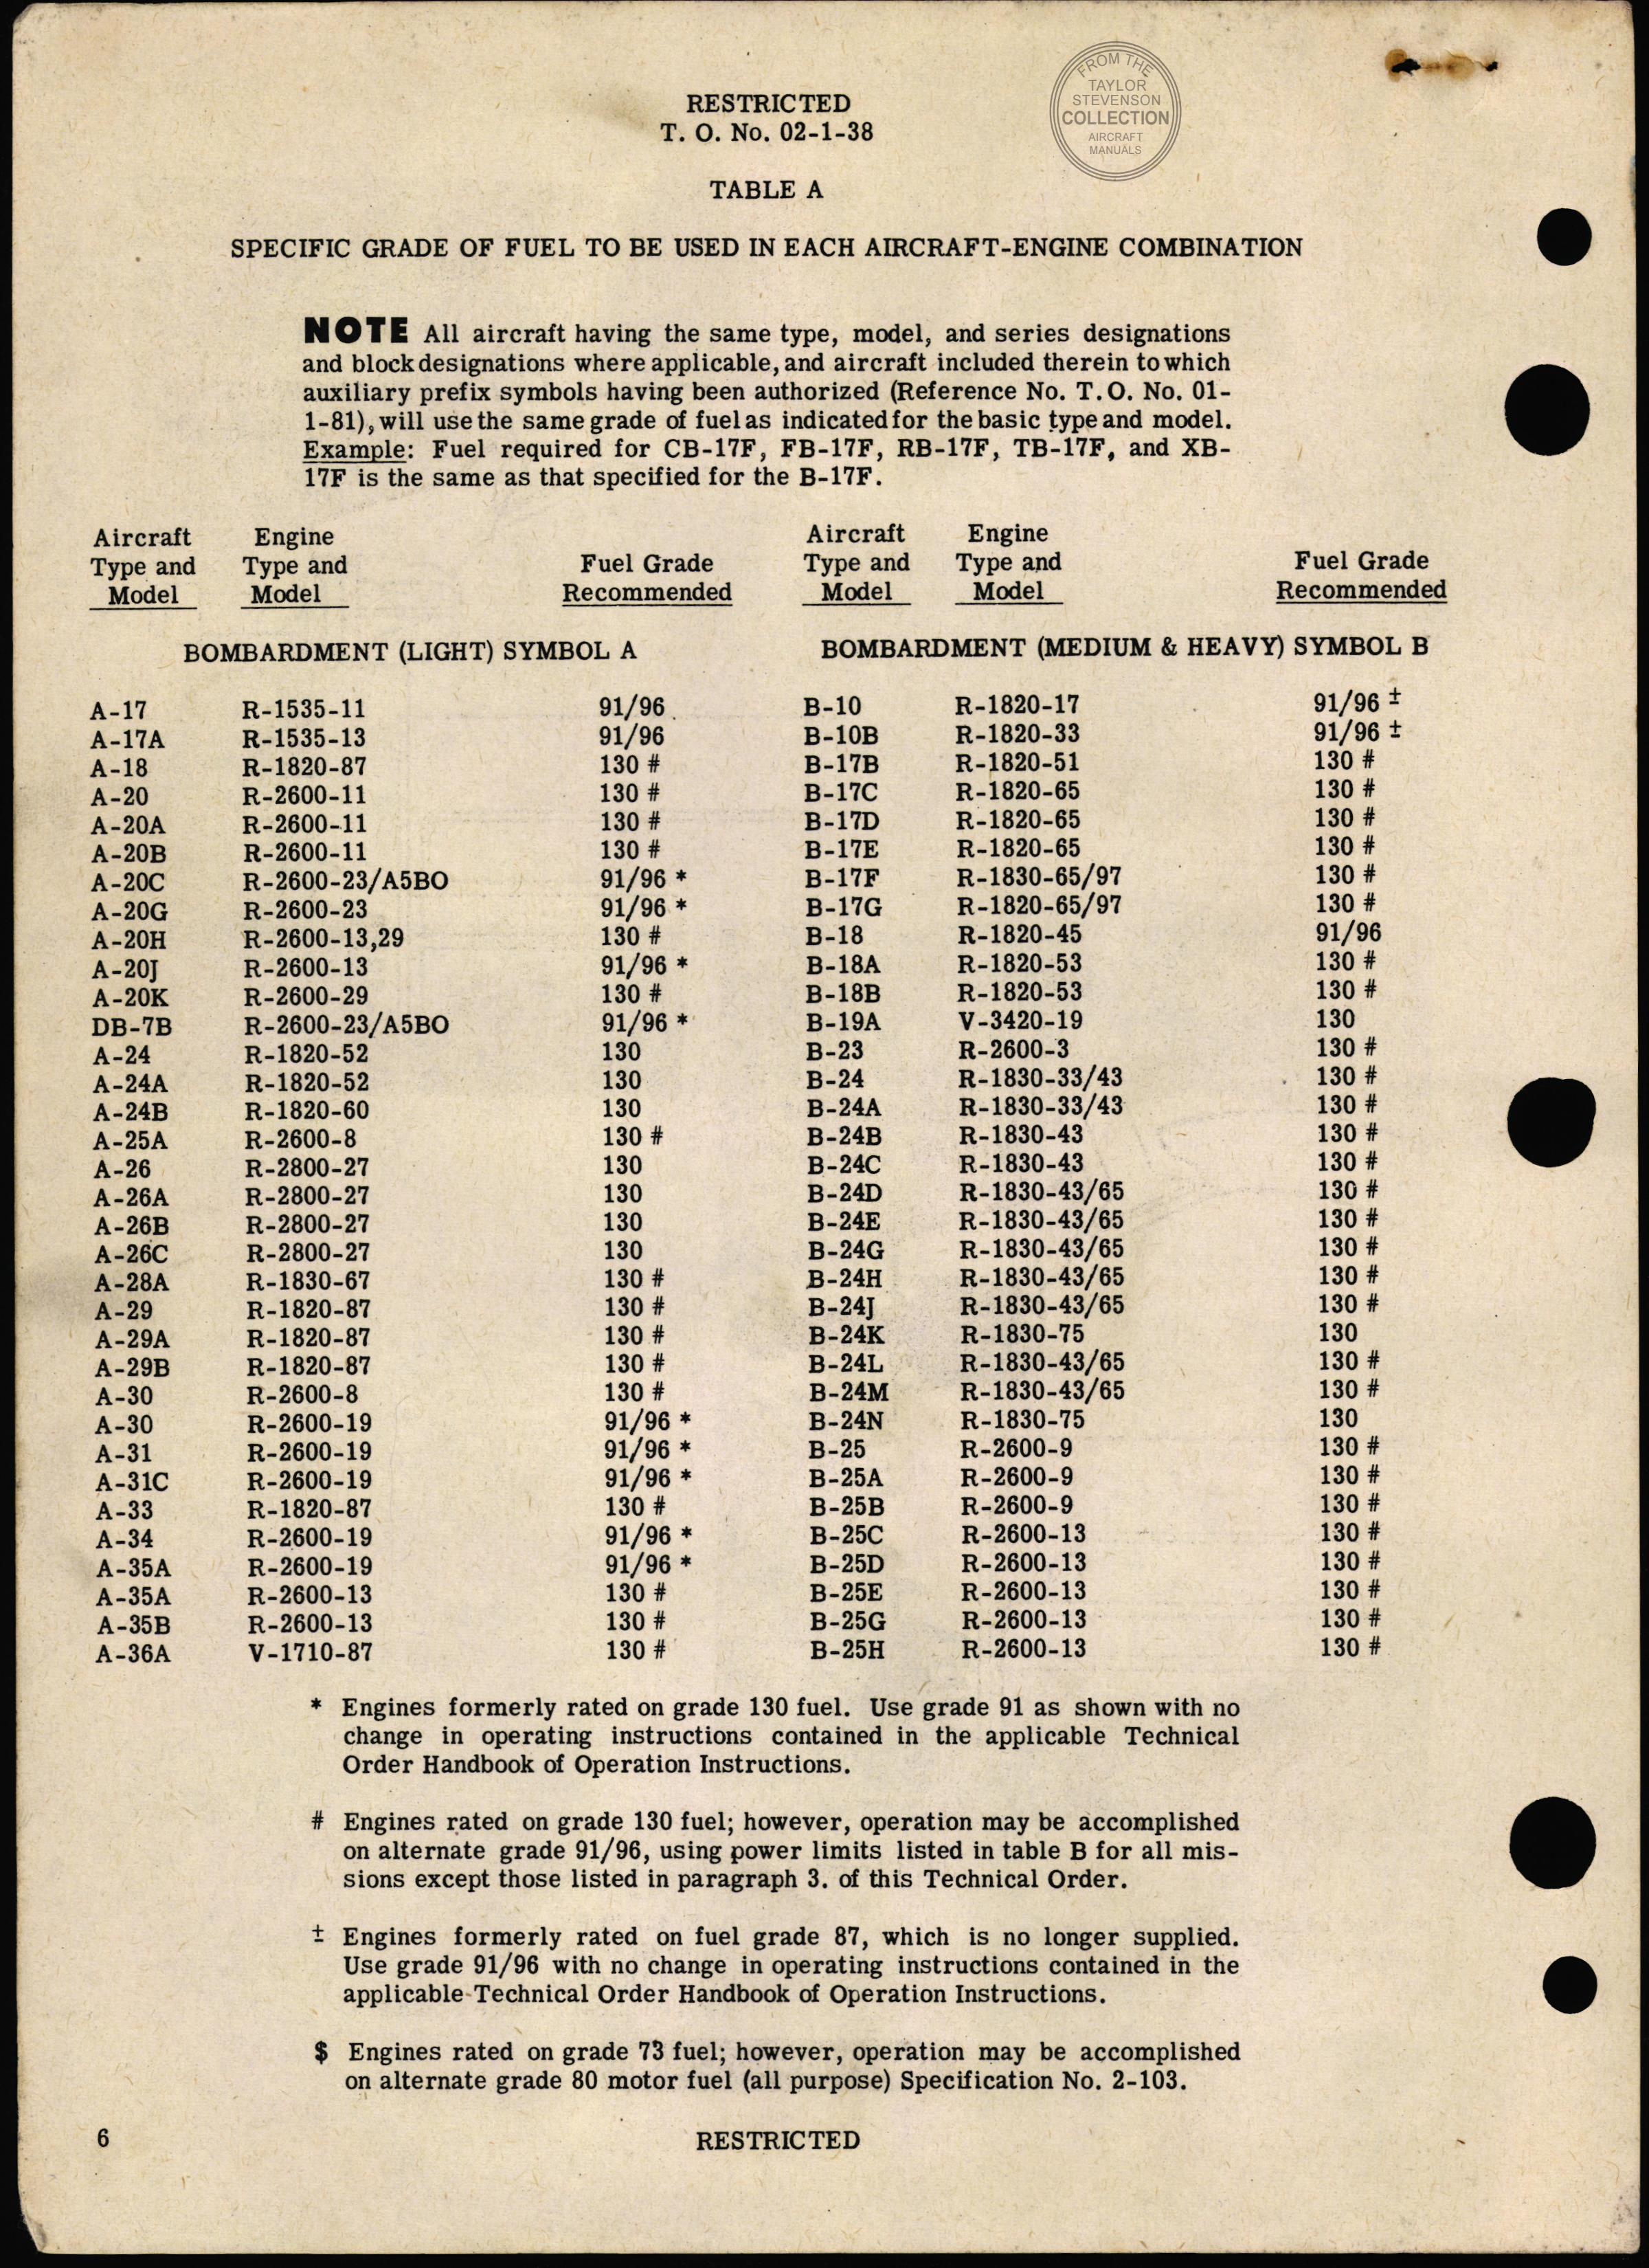 Sample page 8 from AirCorps Library document: Engines and Maintenance Parts - Specified and Alternate Grade Fuel For Aircraft-Engine Combinations